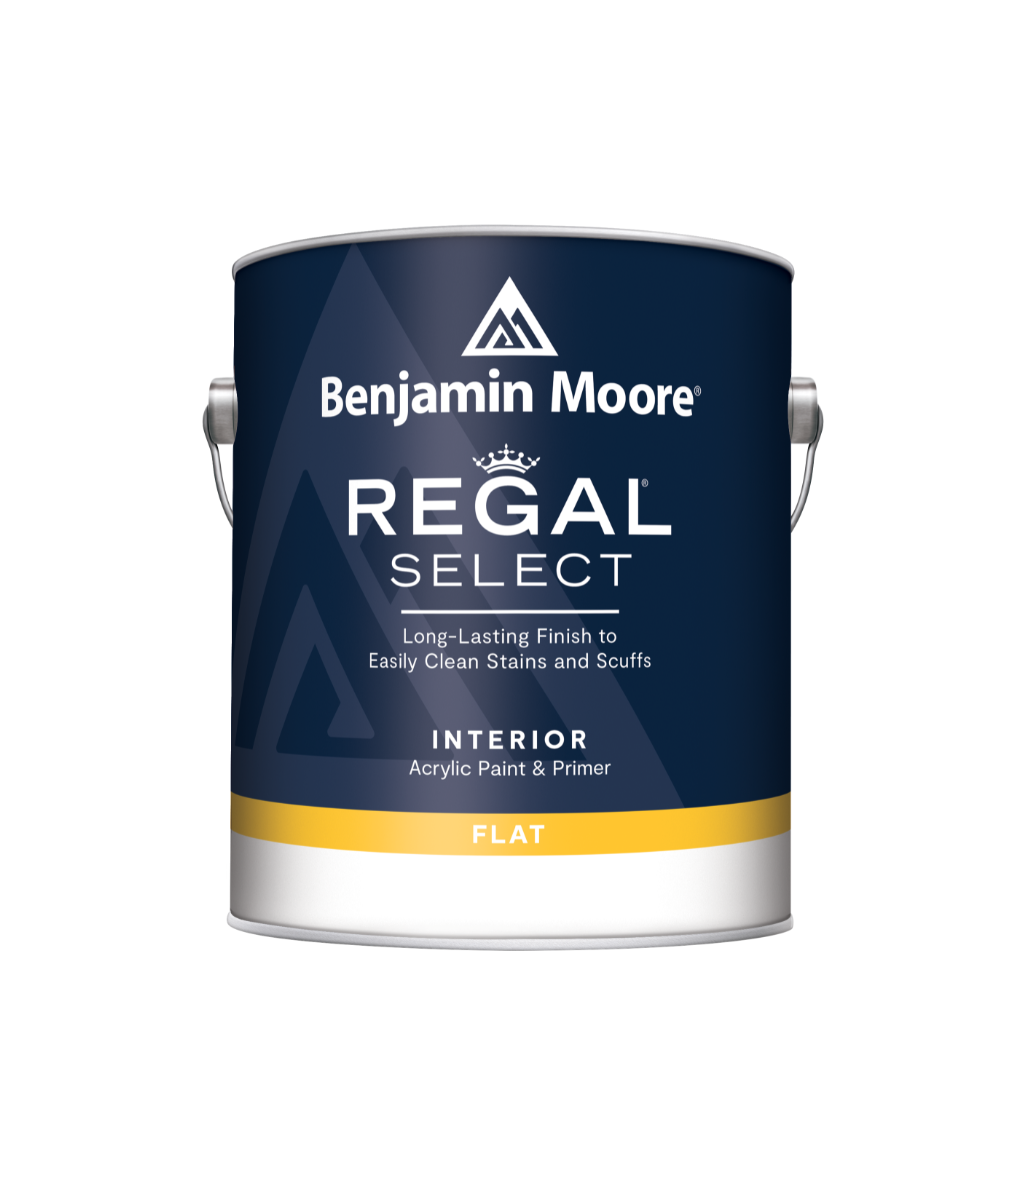 Benjamin Moore Regal Select Flat Paint available at JC Licht.